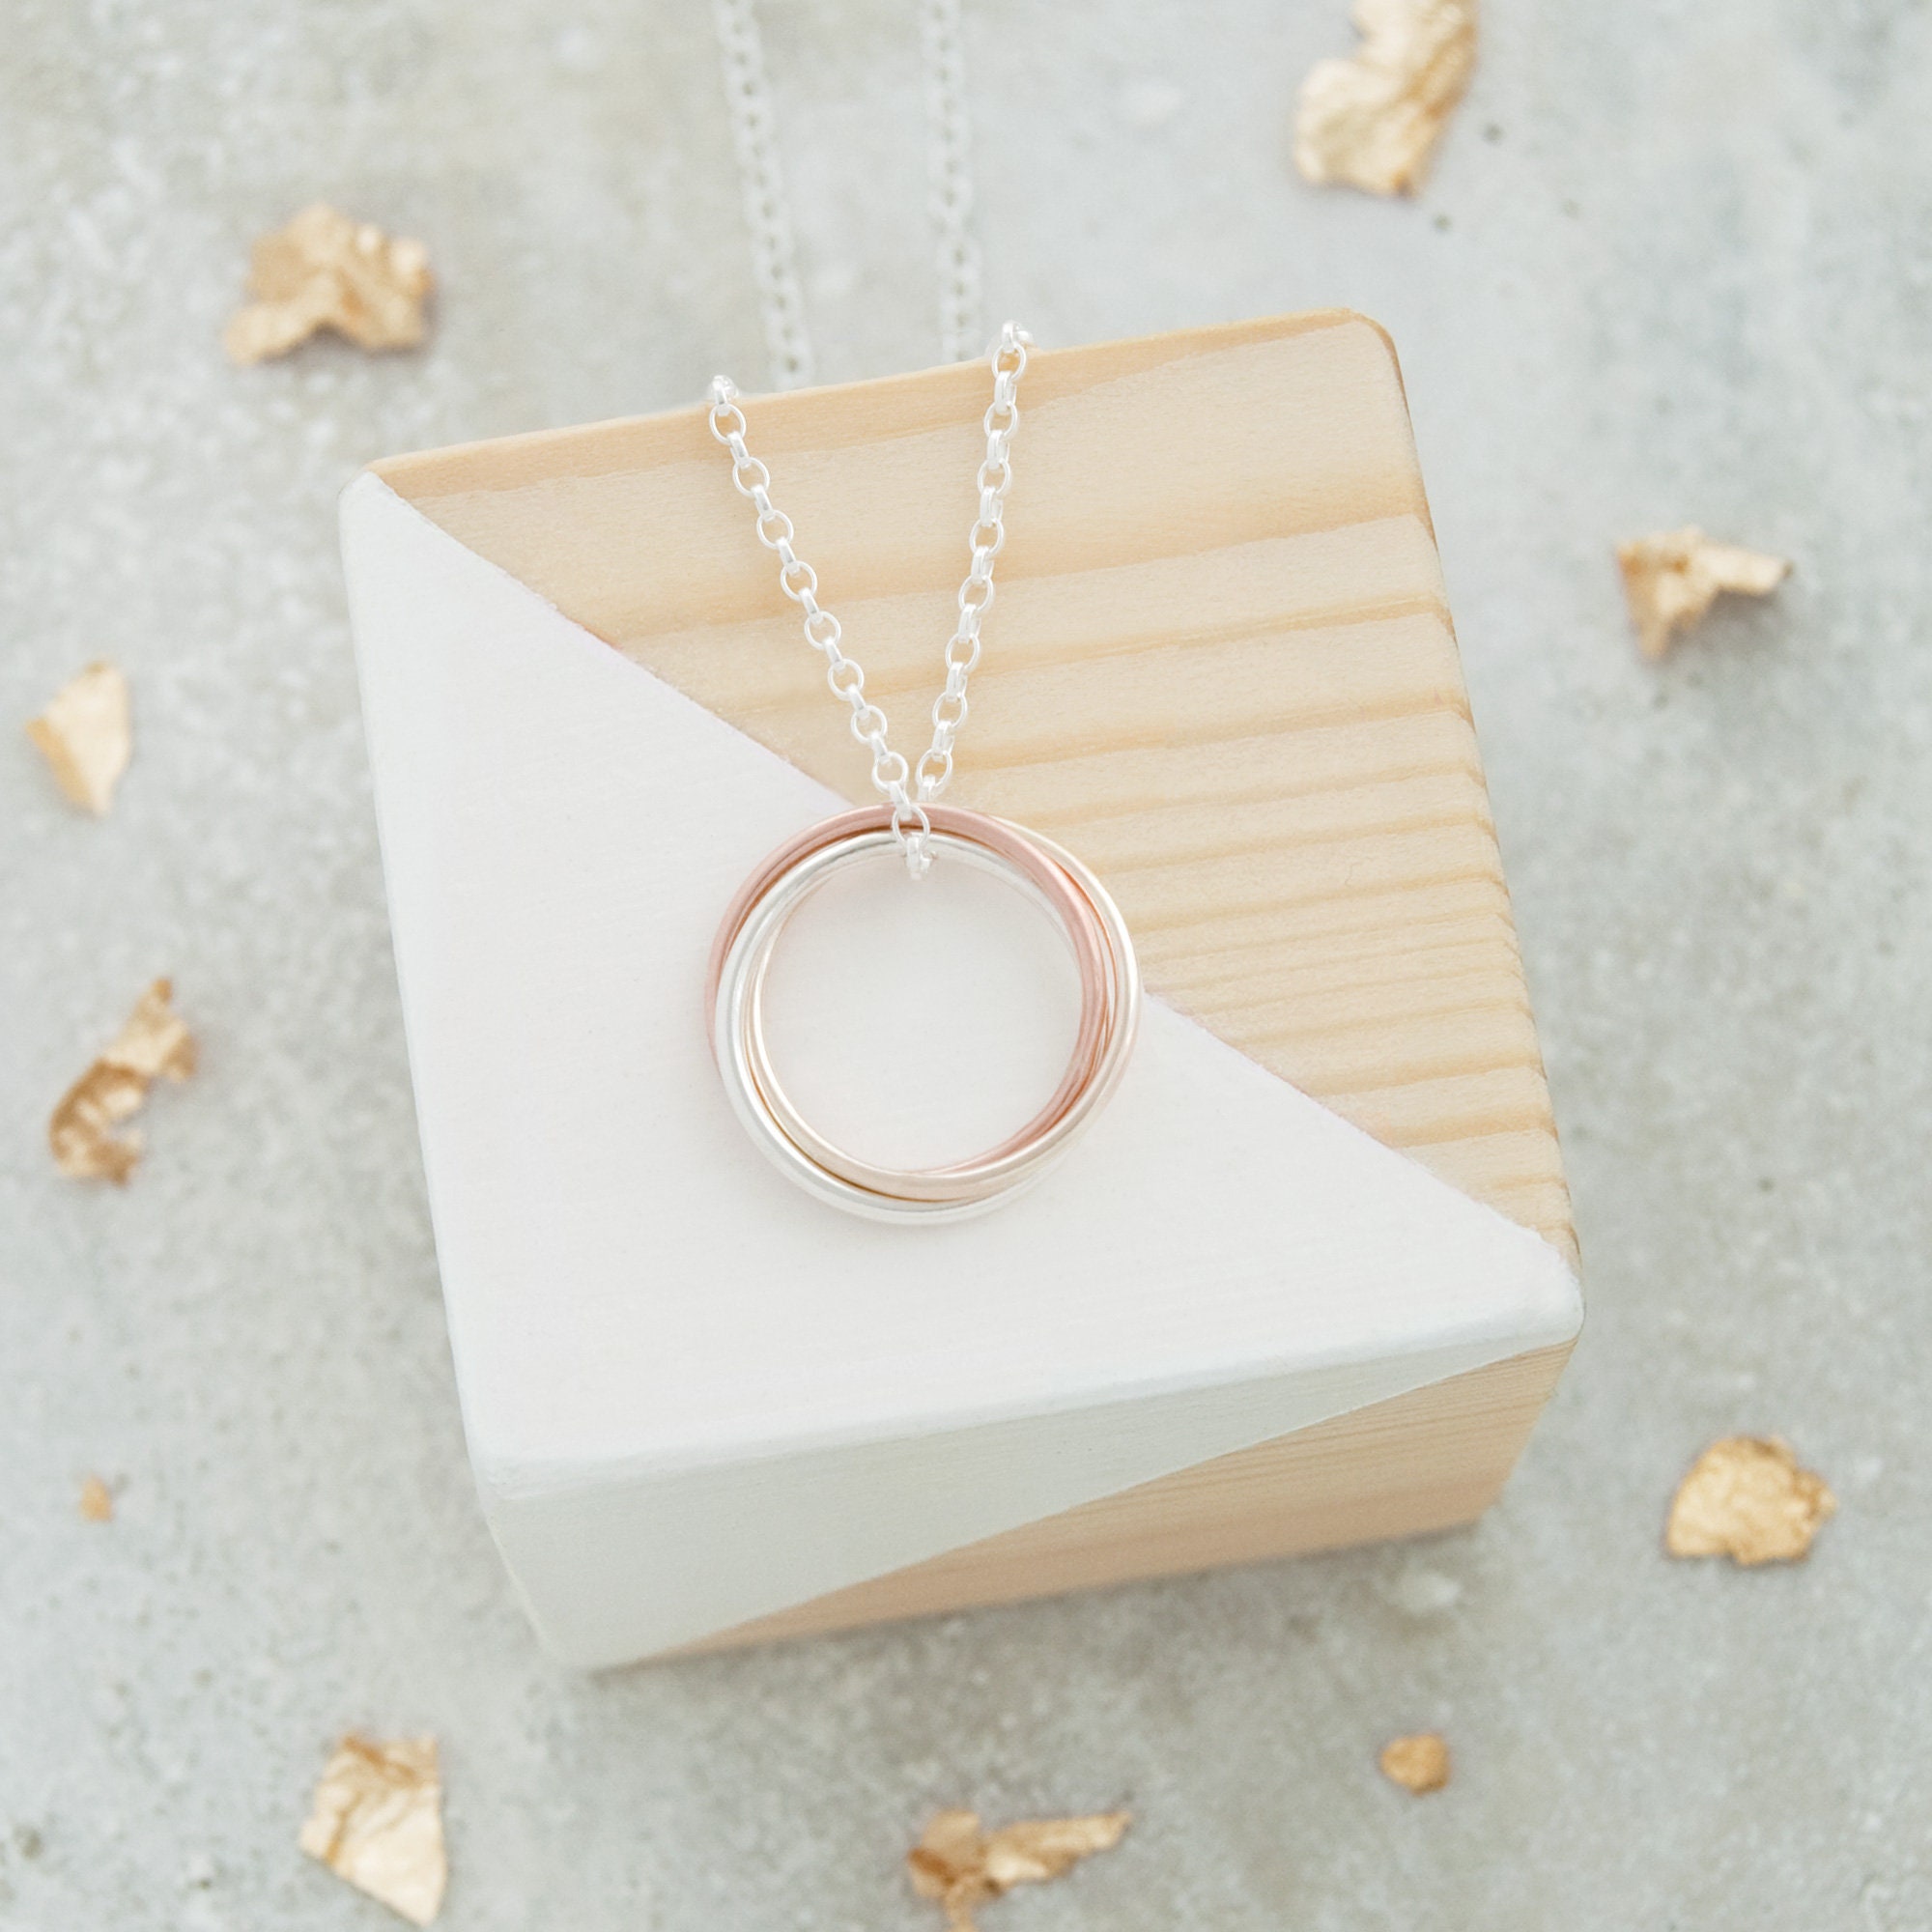 30Th Birthday Necklace - 9Ct Solid Gold & Sterling Silver, Gift, 3 Rings For Decades